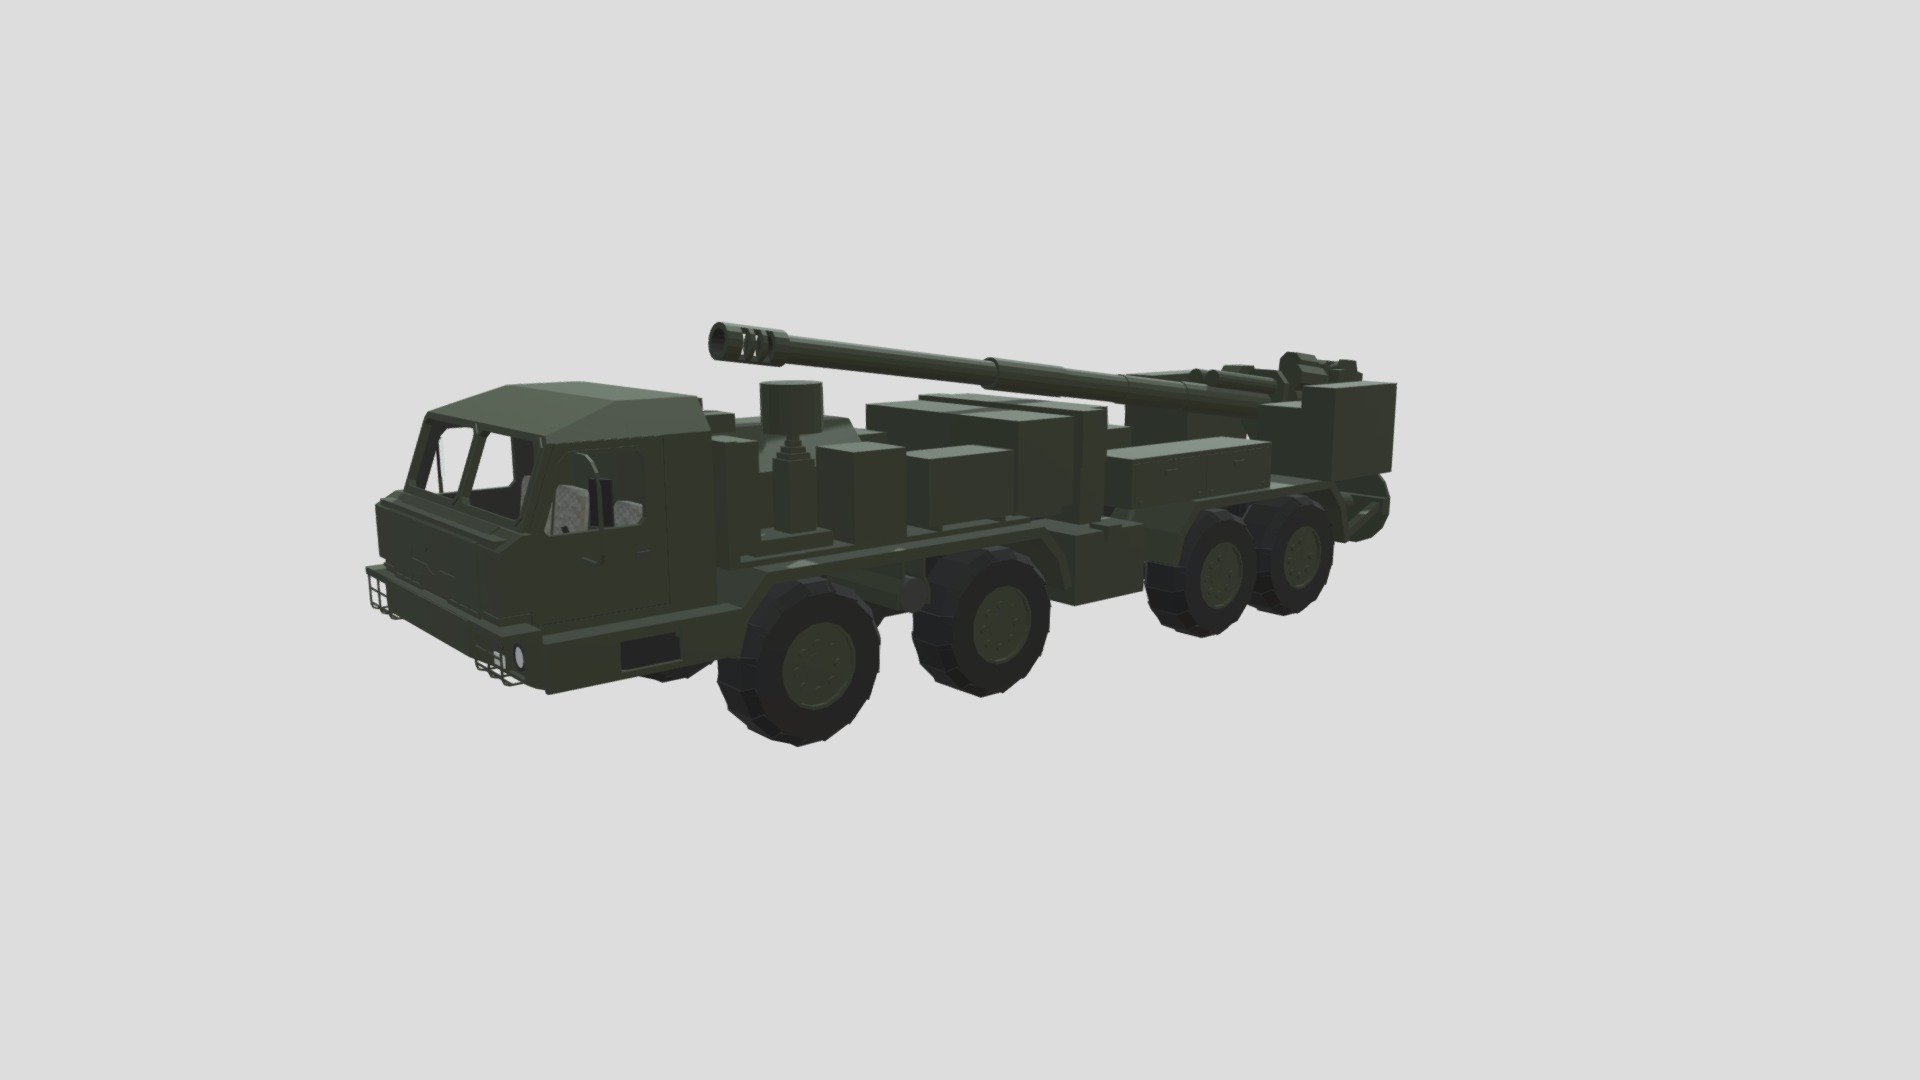 2S43 Malva is a Russian 152-mm interspecific artillery complex on the chassis of a four-wheel drive car BAZ-6610-027 Voschina with a wheel formula of 8 * 8 produced by the Bryansk Automobile Plant. The ACS was created as part of the ROC Outline. The 152 mm rifled howitzer 2A64 with a barrel length of 47 calibers, identical to the 2S19 Msta-S self-propelled gun, is used as a combat weapon. Due to the abandonment of the turret and the reservation of the gun installation site, the machine became much lighter, which made it possible to transport it by VTA aircraft, such as the Il-76 3d model